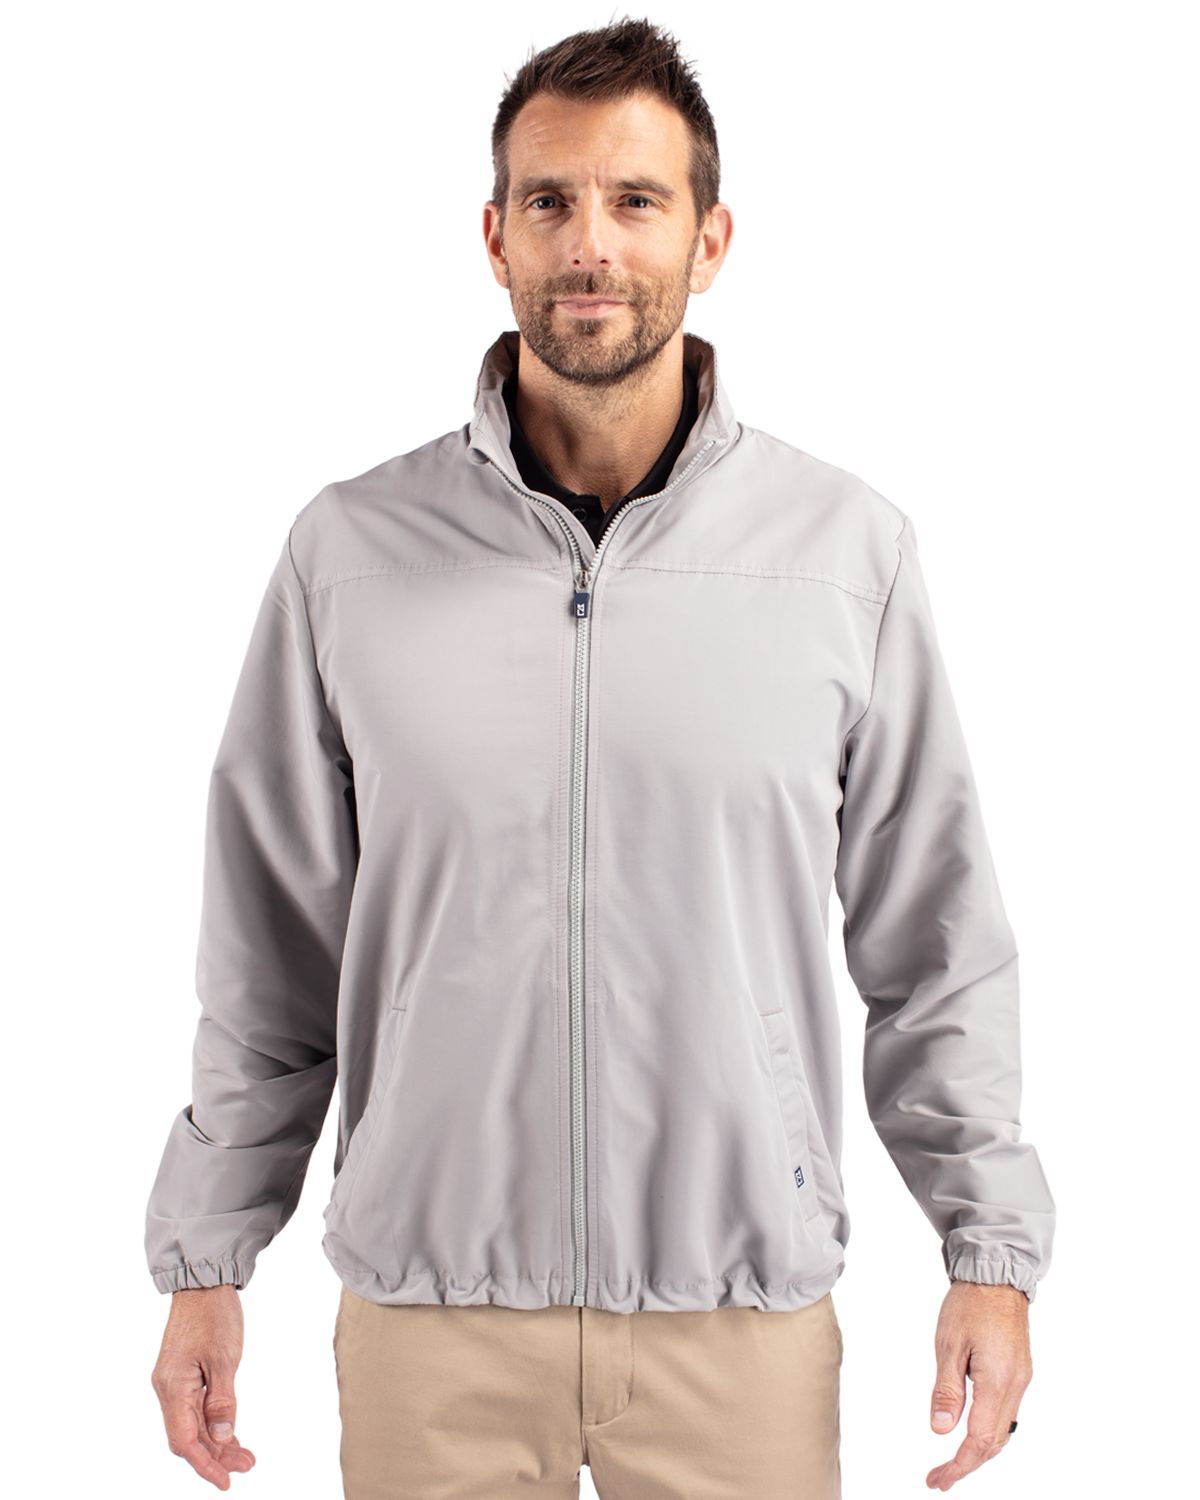 Cutter Buck Charter Eco Knit Recycled Mens Full-Zip Jacket - Tour blue